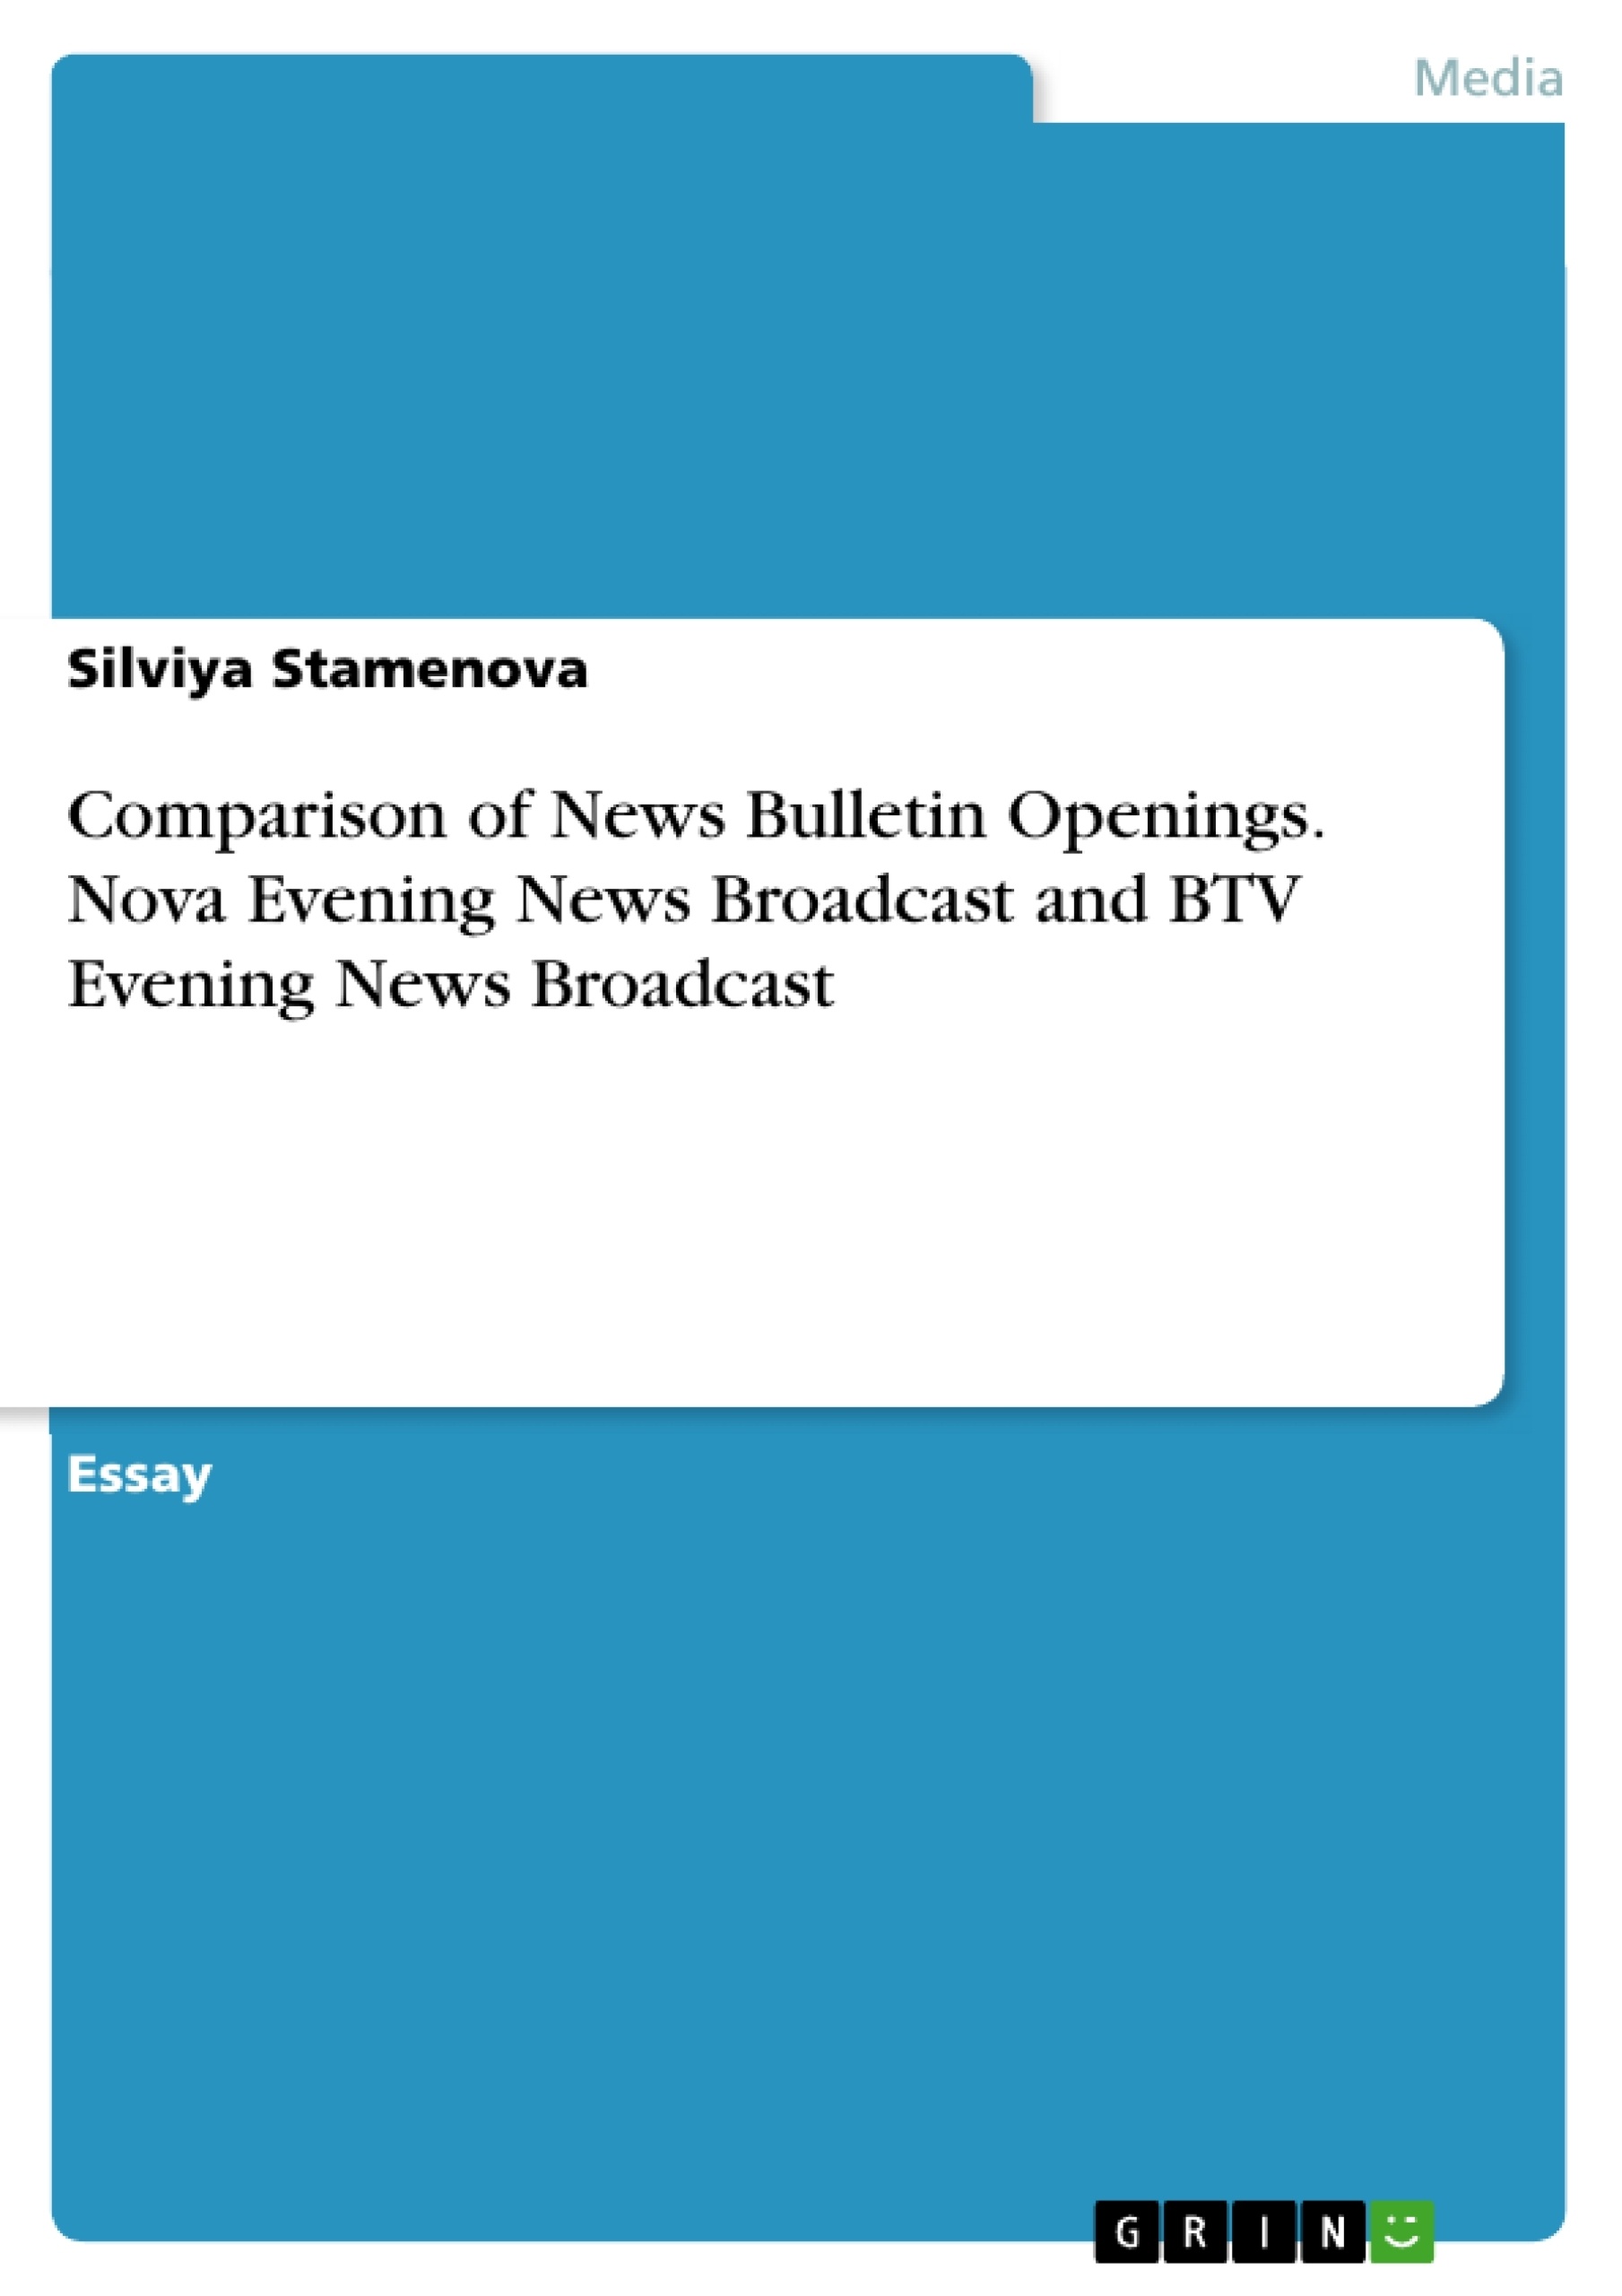 Titre: Comparison of News Bulletin Openings. Nova Evening News Broadcast and BTV Evening News Broadcast